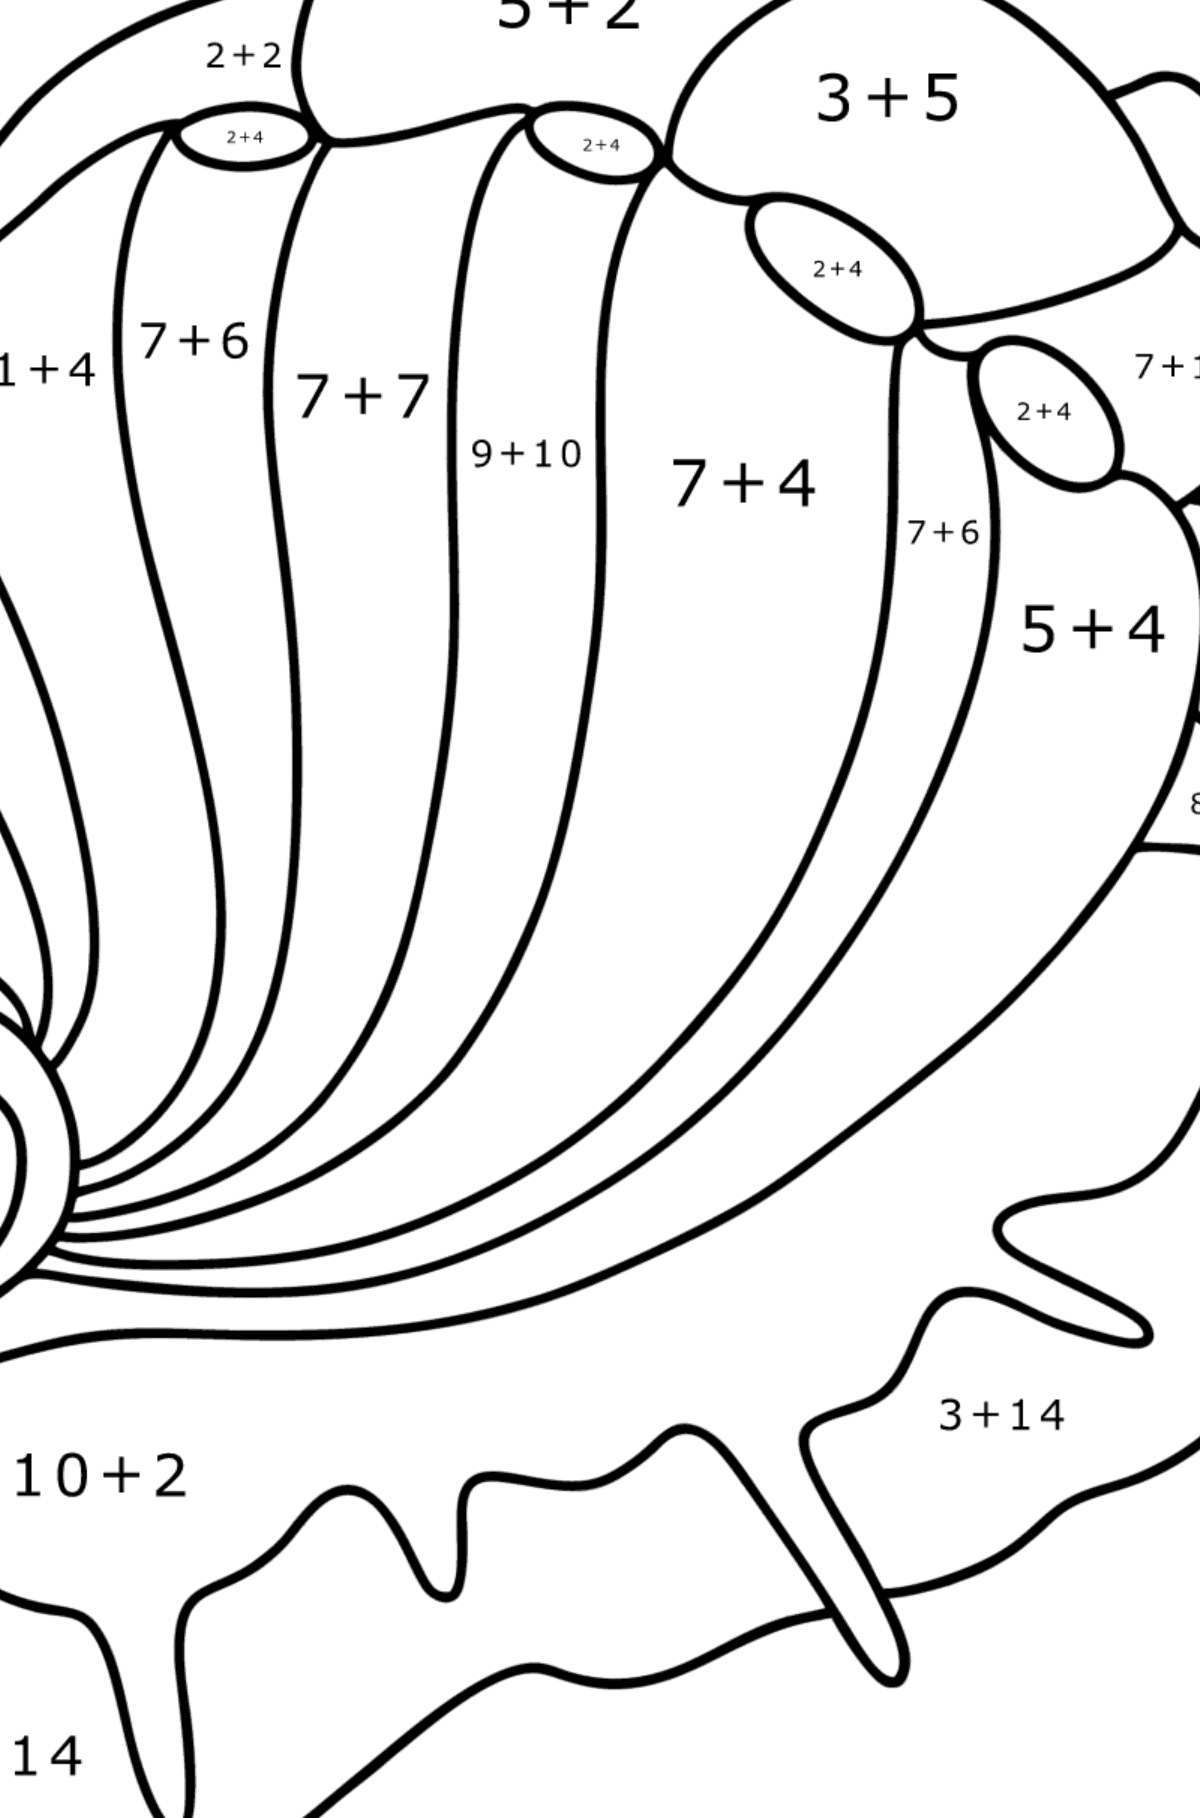 Mollusk abalone coloring page - Math Coloring - Addition for Kids